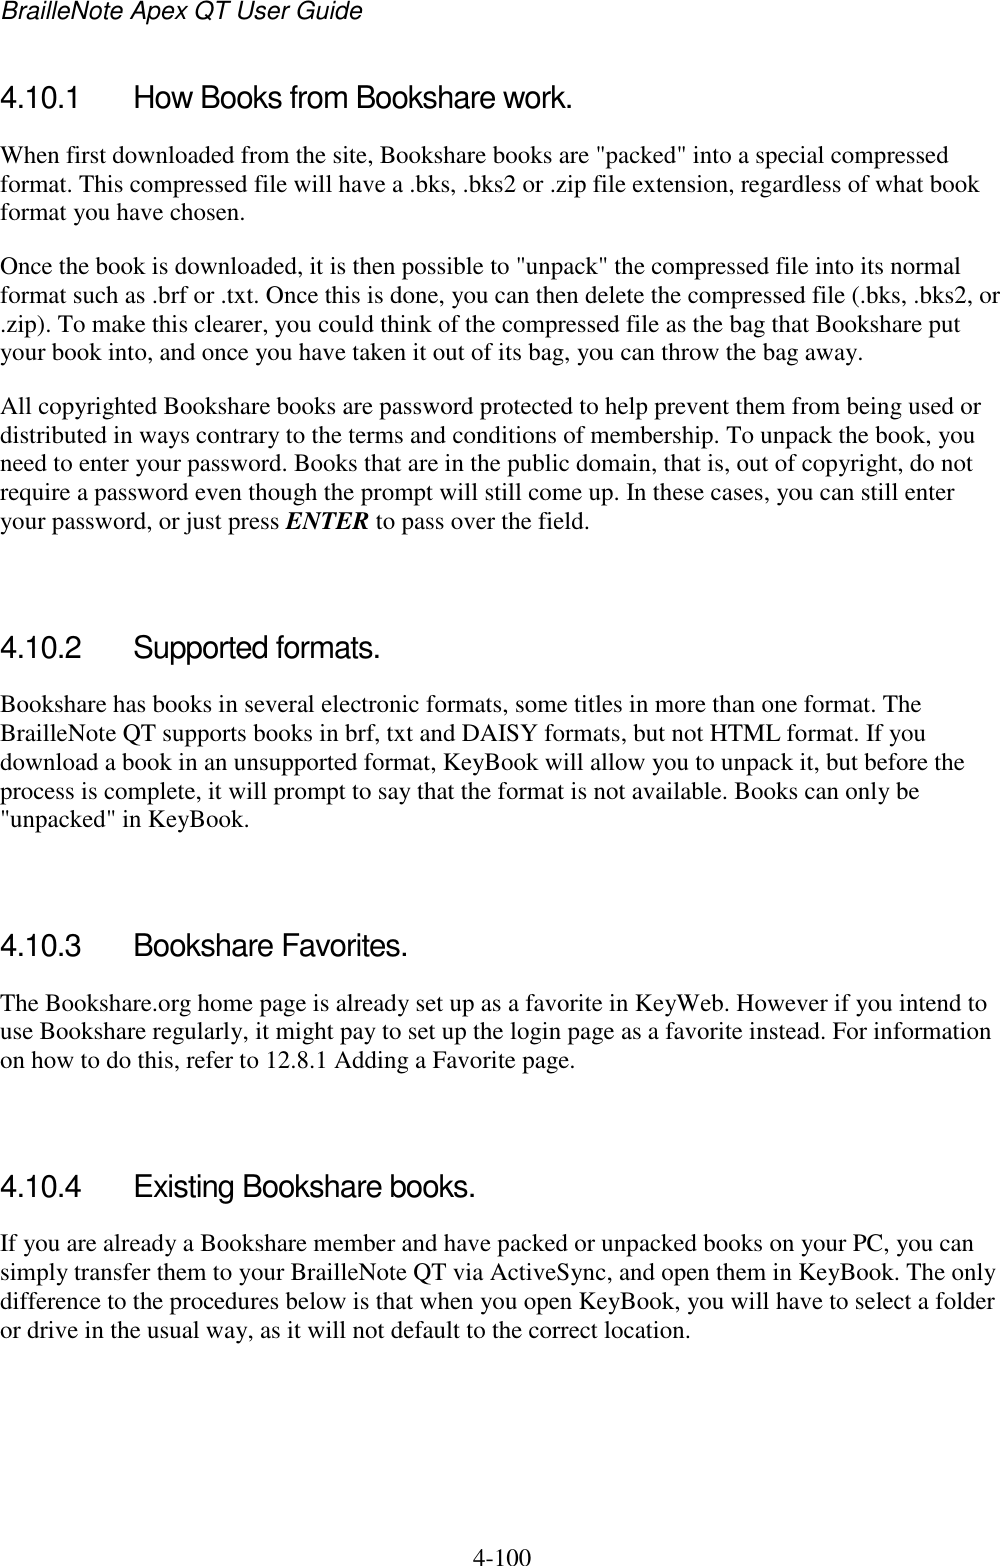 BrailleNote Apex QT User Guide  4-100   4.10.1  How Books from Bookshare work. When first downloaded from the site, Bookshare books are &quot;packed&quot; into a special compressed format. This compressed file will have a .bks, .bks2 or .zip file extension, regardless of what book format you have chosen. Once the book is downloaded, it is then possible to &quot;unpack&quot; the compressed file into its normal format such as .brf or .txt. Once this is done, you can then delete the compressed file (.bks, .bks2, or .zip). To make this clearer, you could think of the compressed file as the bag that Bookshare put your book into, and once you have taken it out of its bag, you can throw the bag away. All copyrighted Bookshare books are password protected to help prevent them from being used or distributed in ways contrary to the terms and conditions of membership. To unpack the book, you need to enter your password. Books that are in the public domain, that is, out of copyright, do not require a password even though the prompt will still come up. In these cases, you can still enter your password, or just press ENTER to pass over the field.   4.10.2  Supported formats. Bookshare has books in several electronic formats, some titles in more than one format. The BrailleNote QT supports books in brf, txt and DAISY formats, but not HTML format. If you download a book in an unsupported format, KeyBook will allow you to unpack it, but before the process is complete, it will prompt to say that the format is not available. Books can only be &quot;unpacked&quot; in KeyBook.   4.10.3  Bookshare Favorites. The Bookshare.org home page is already set up as a favorite in KeyWeb. However if you intend to use Bookshare regularly, it might pay to set up the login page as a favorite instead. For information on how to do this, refer to 12.8.1 Adding a Favorite page.   4.10.4  Existing Bookshare books. If you are already a Bookshare member and have packed or unpacked books on your PC, you can simply transfer them to your BrailleNote QT via ActiveSync, and open them in KeyBook. The only difference to the procedures below is that when you open KeyBook, you will have to select a folder or drive in the usual way, as it will not default to the correct location.   